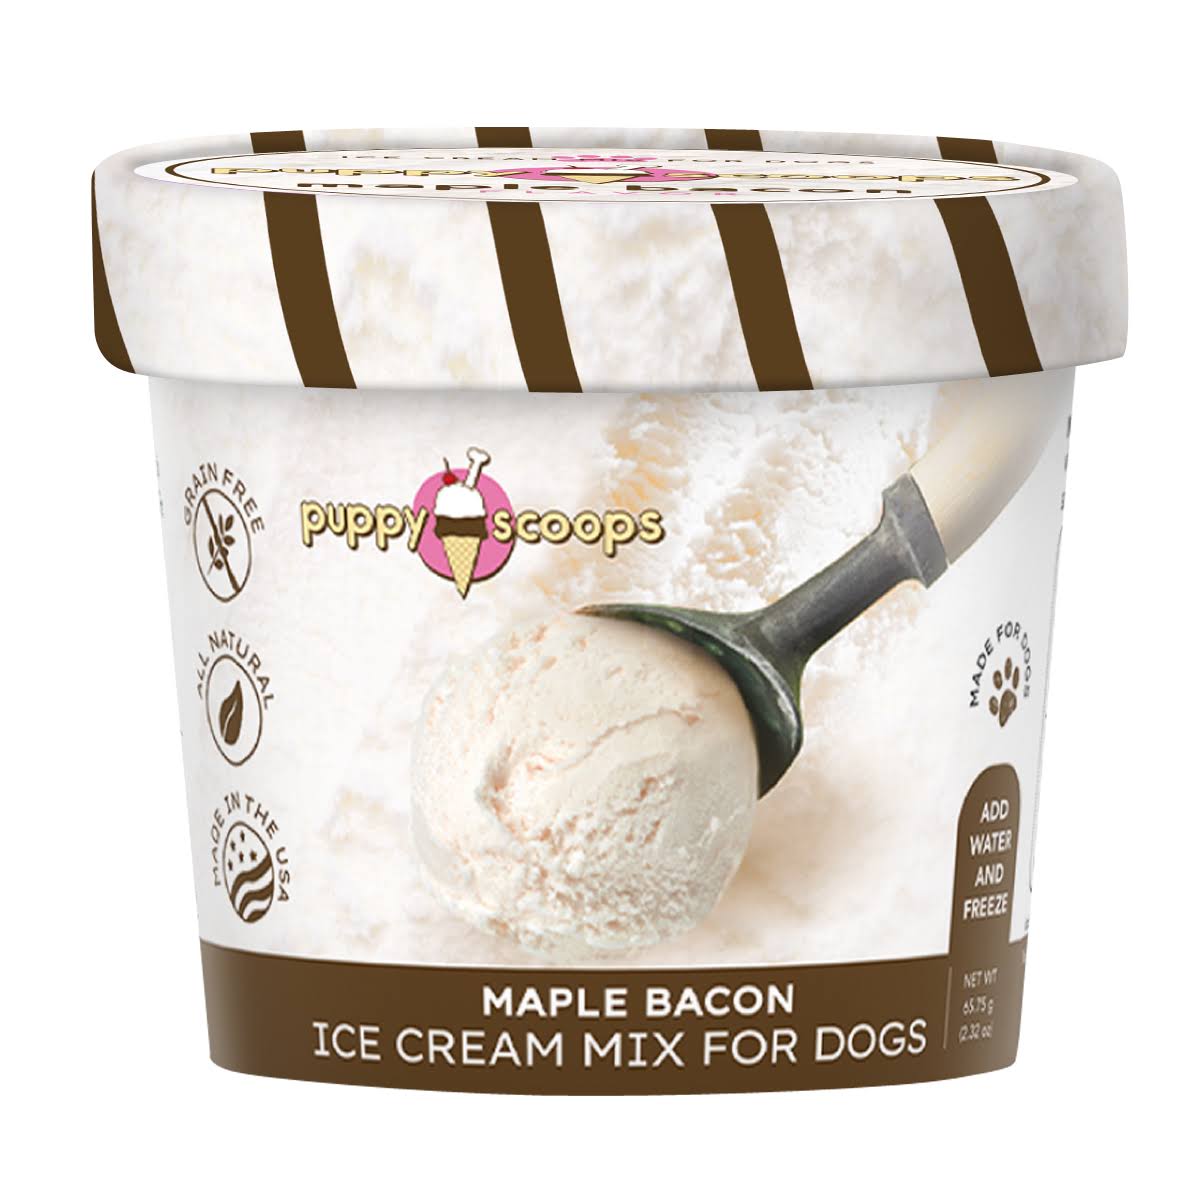 Puppy Cake Scoops Maple Bacon Ice Cream Mix for Dogs